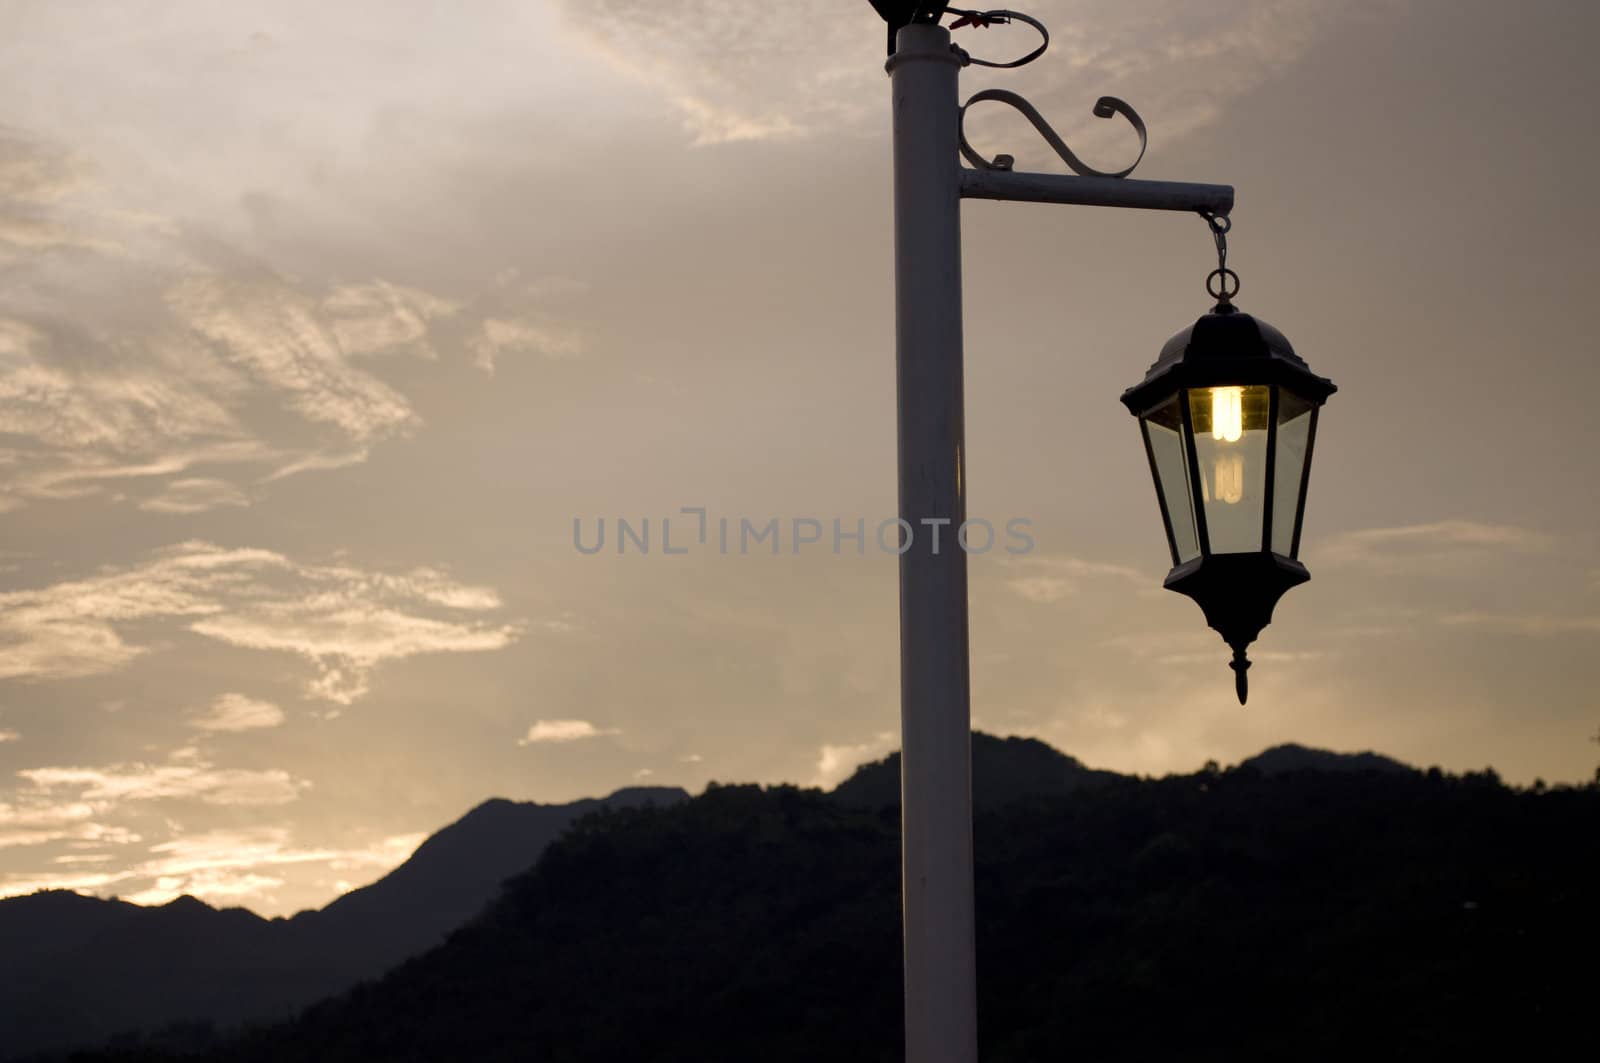 An outdoor lamp against a mountain background during sunset.